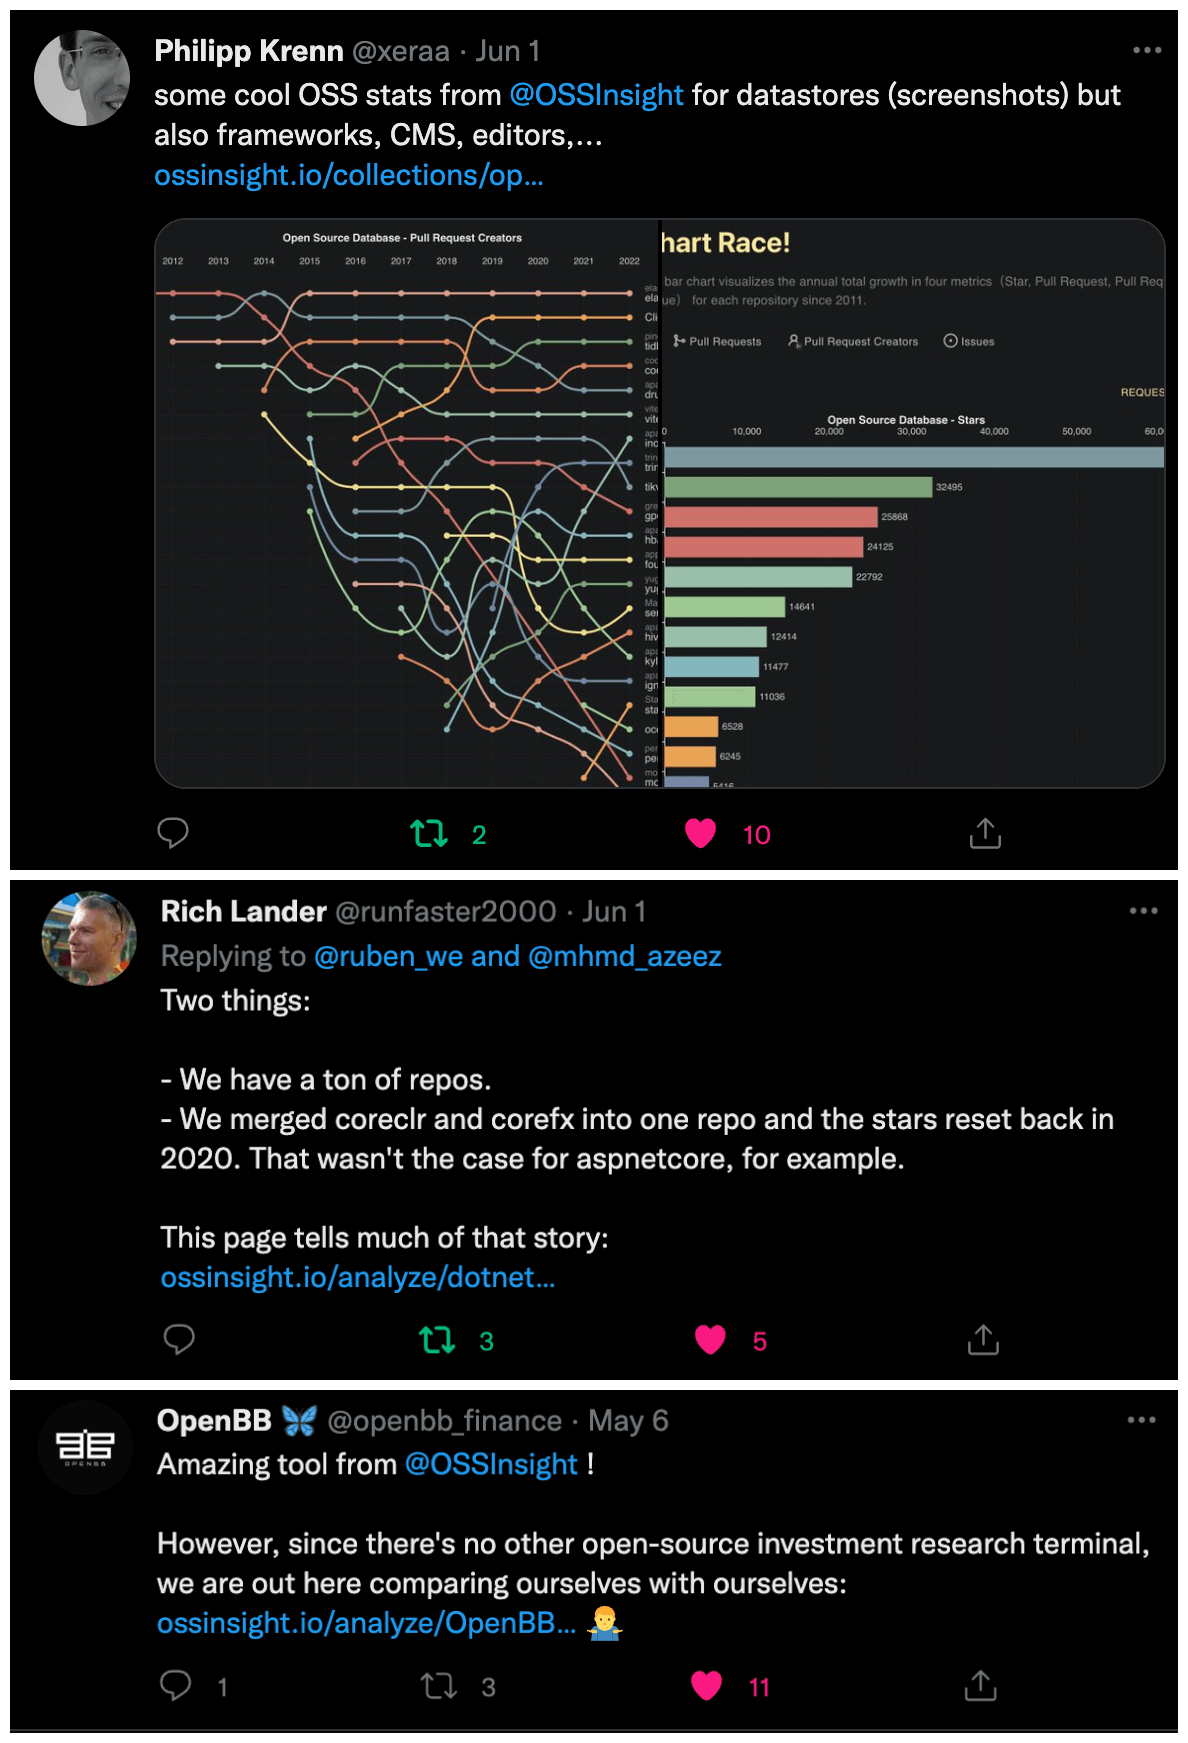 Applause given by developers and organizations on Twitter-1